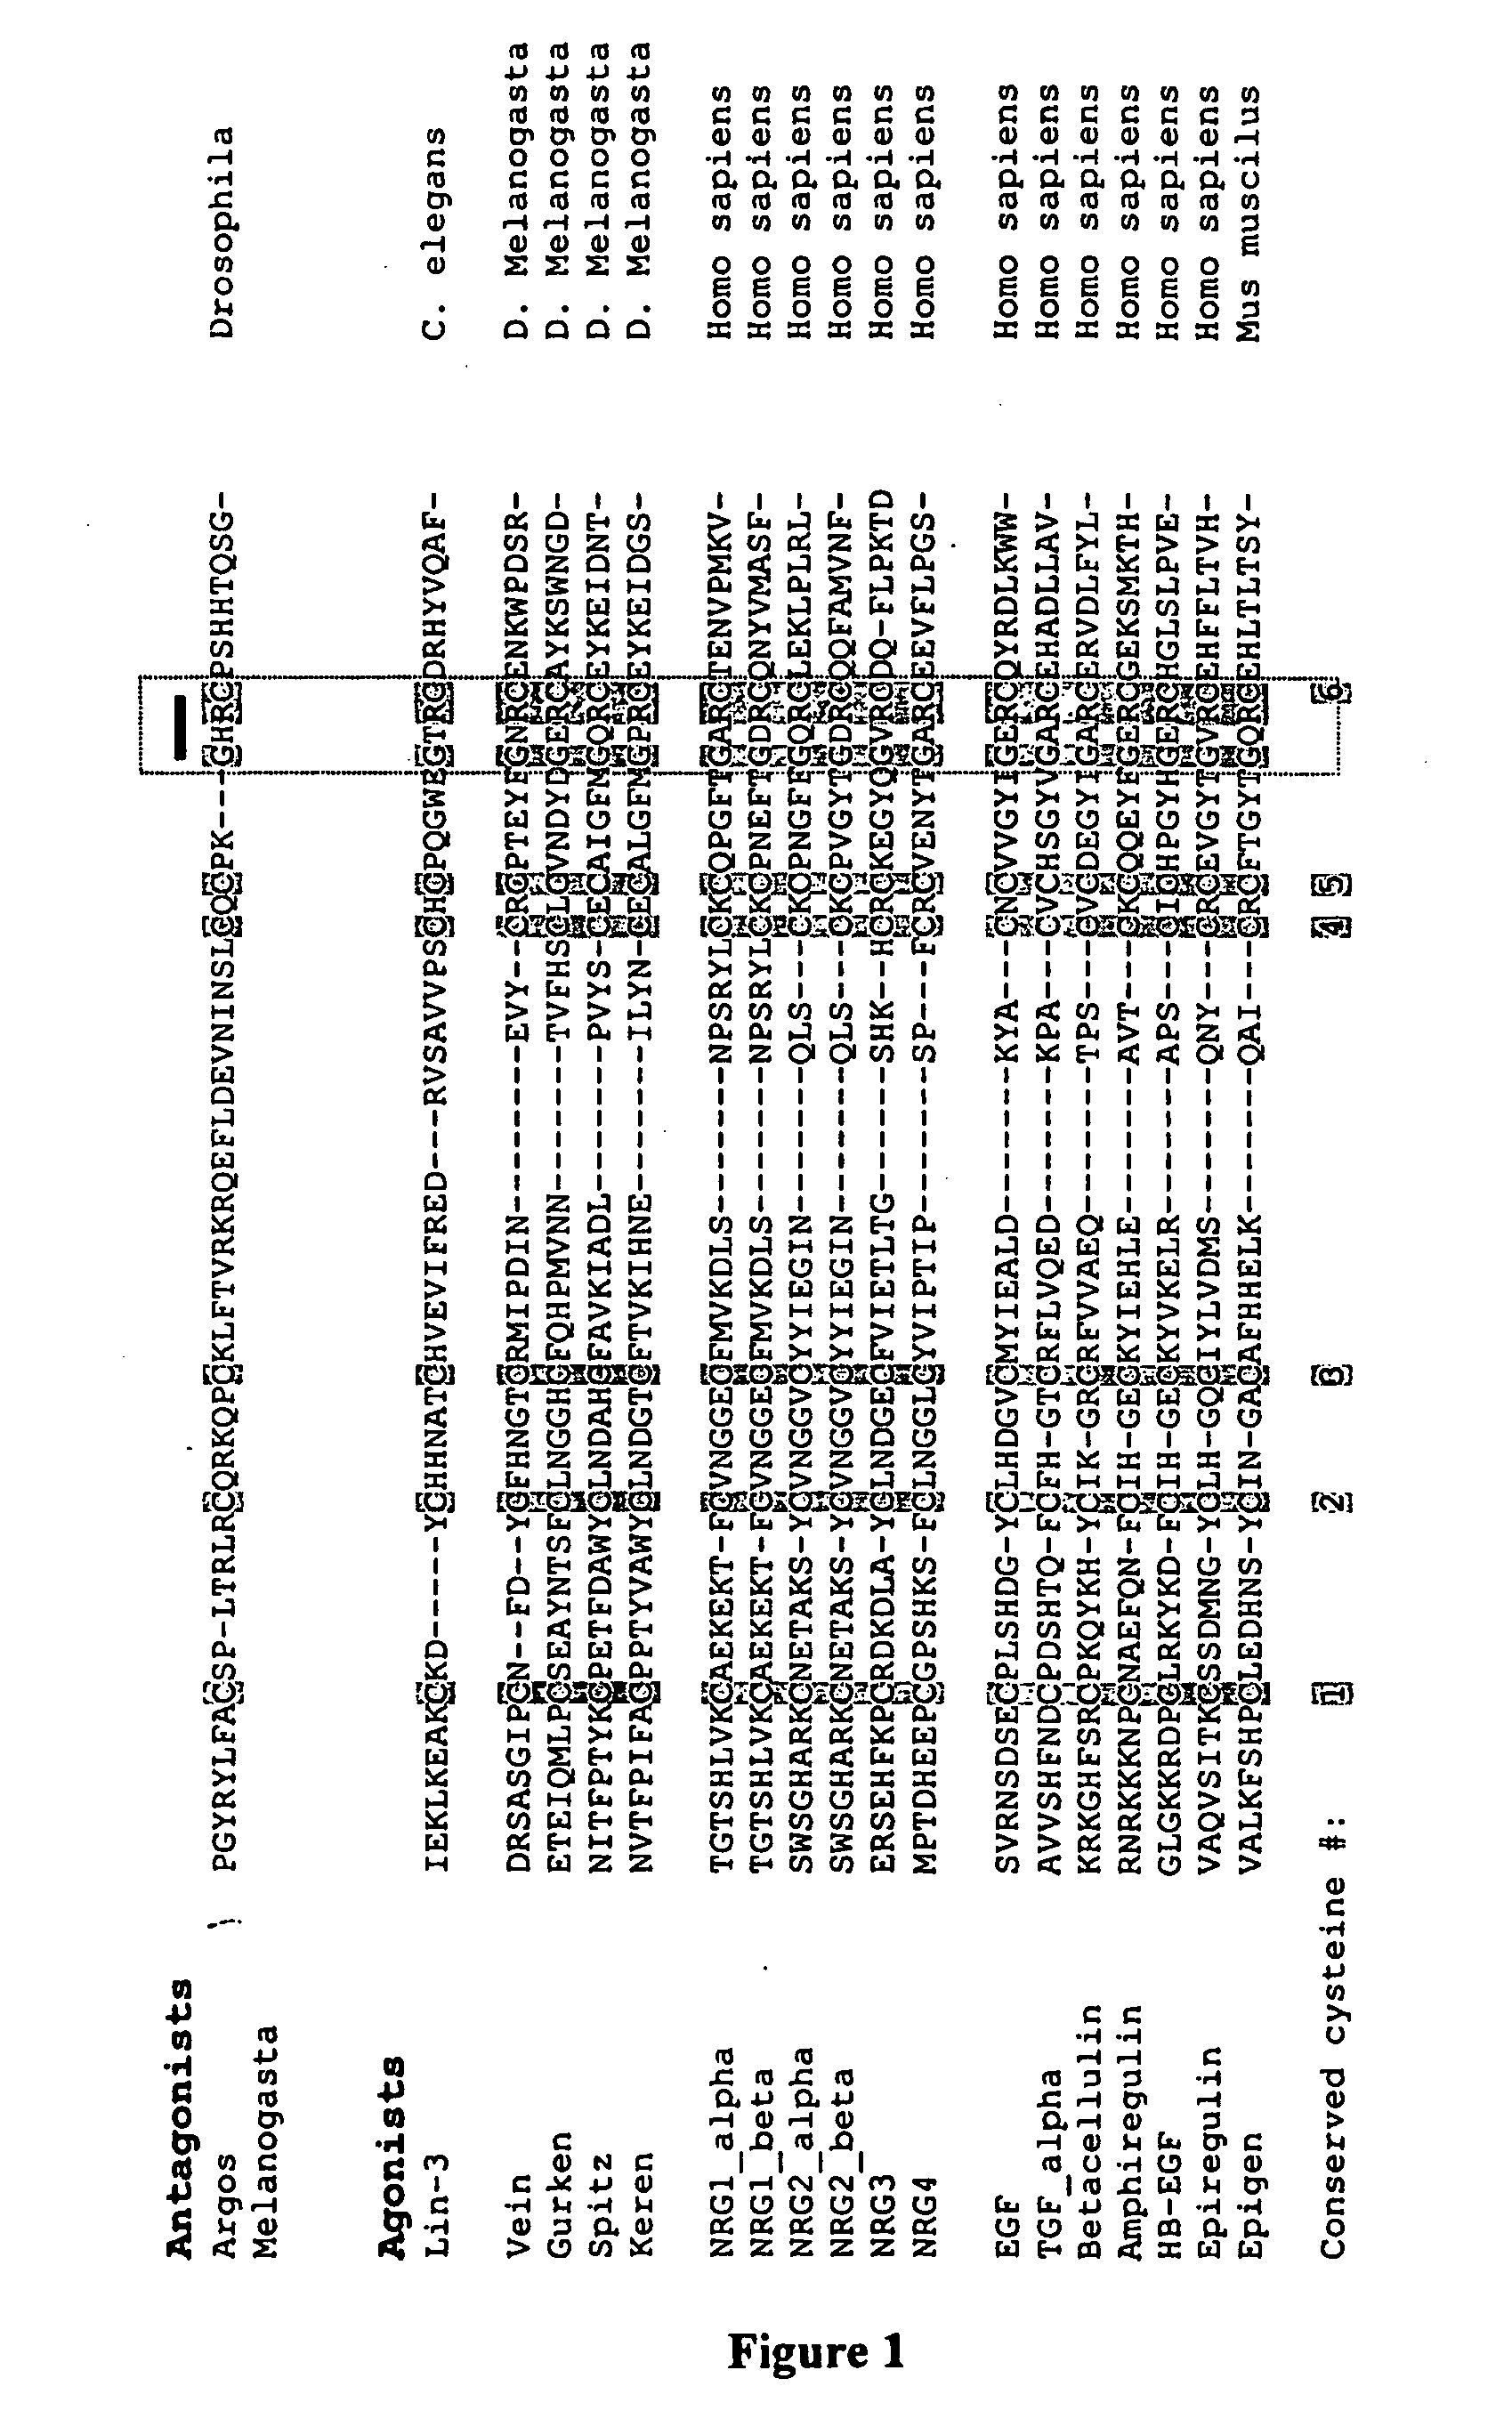 Splice Variants of ErbB Ligands, Compositions and Uses Thereof